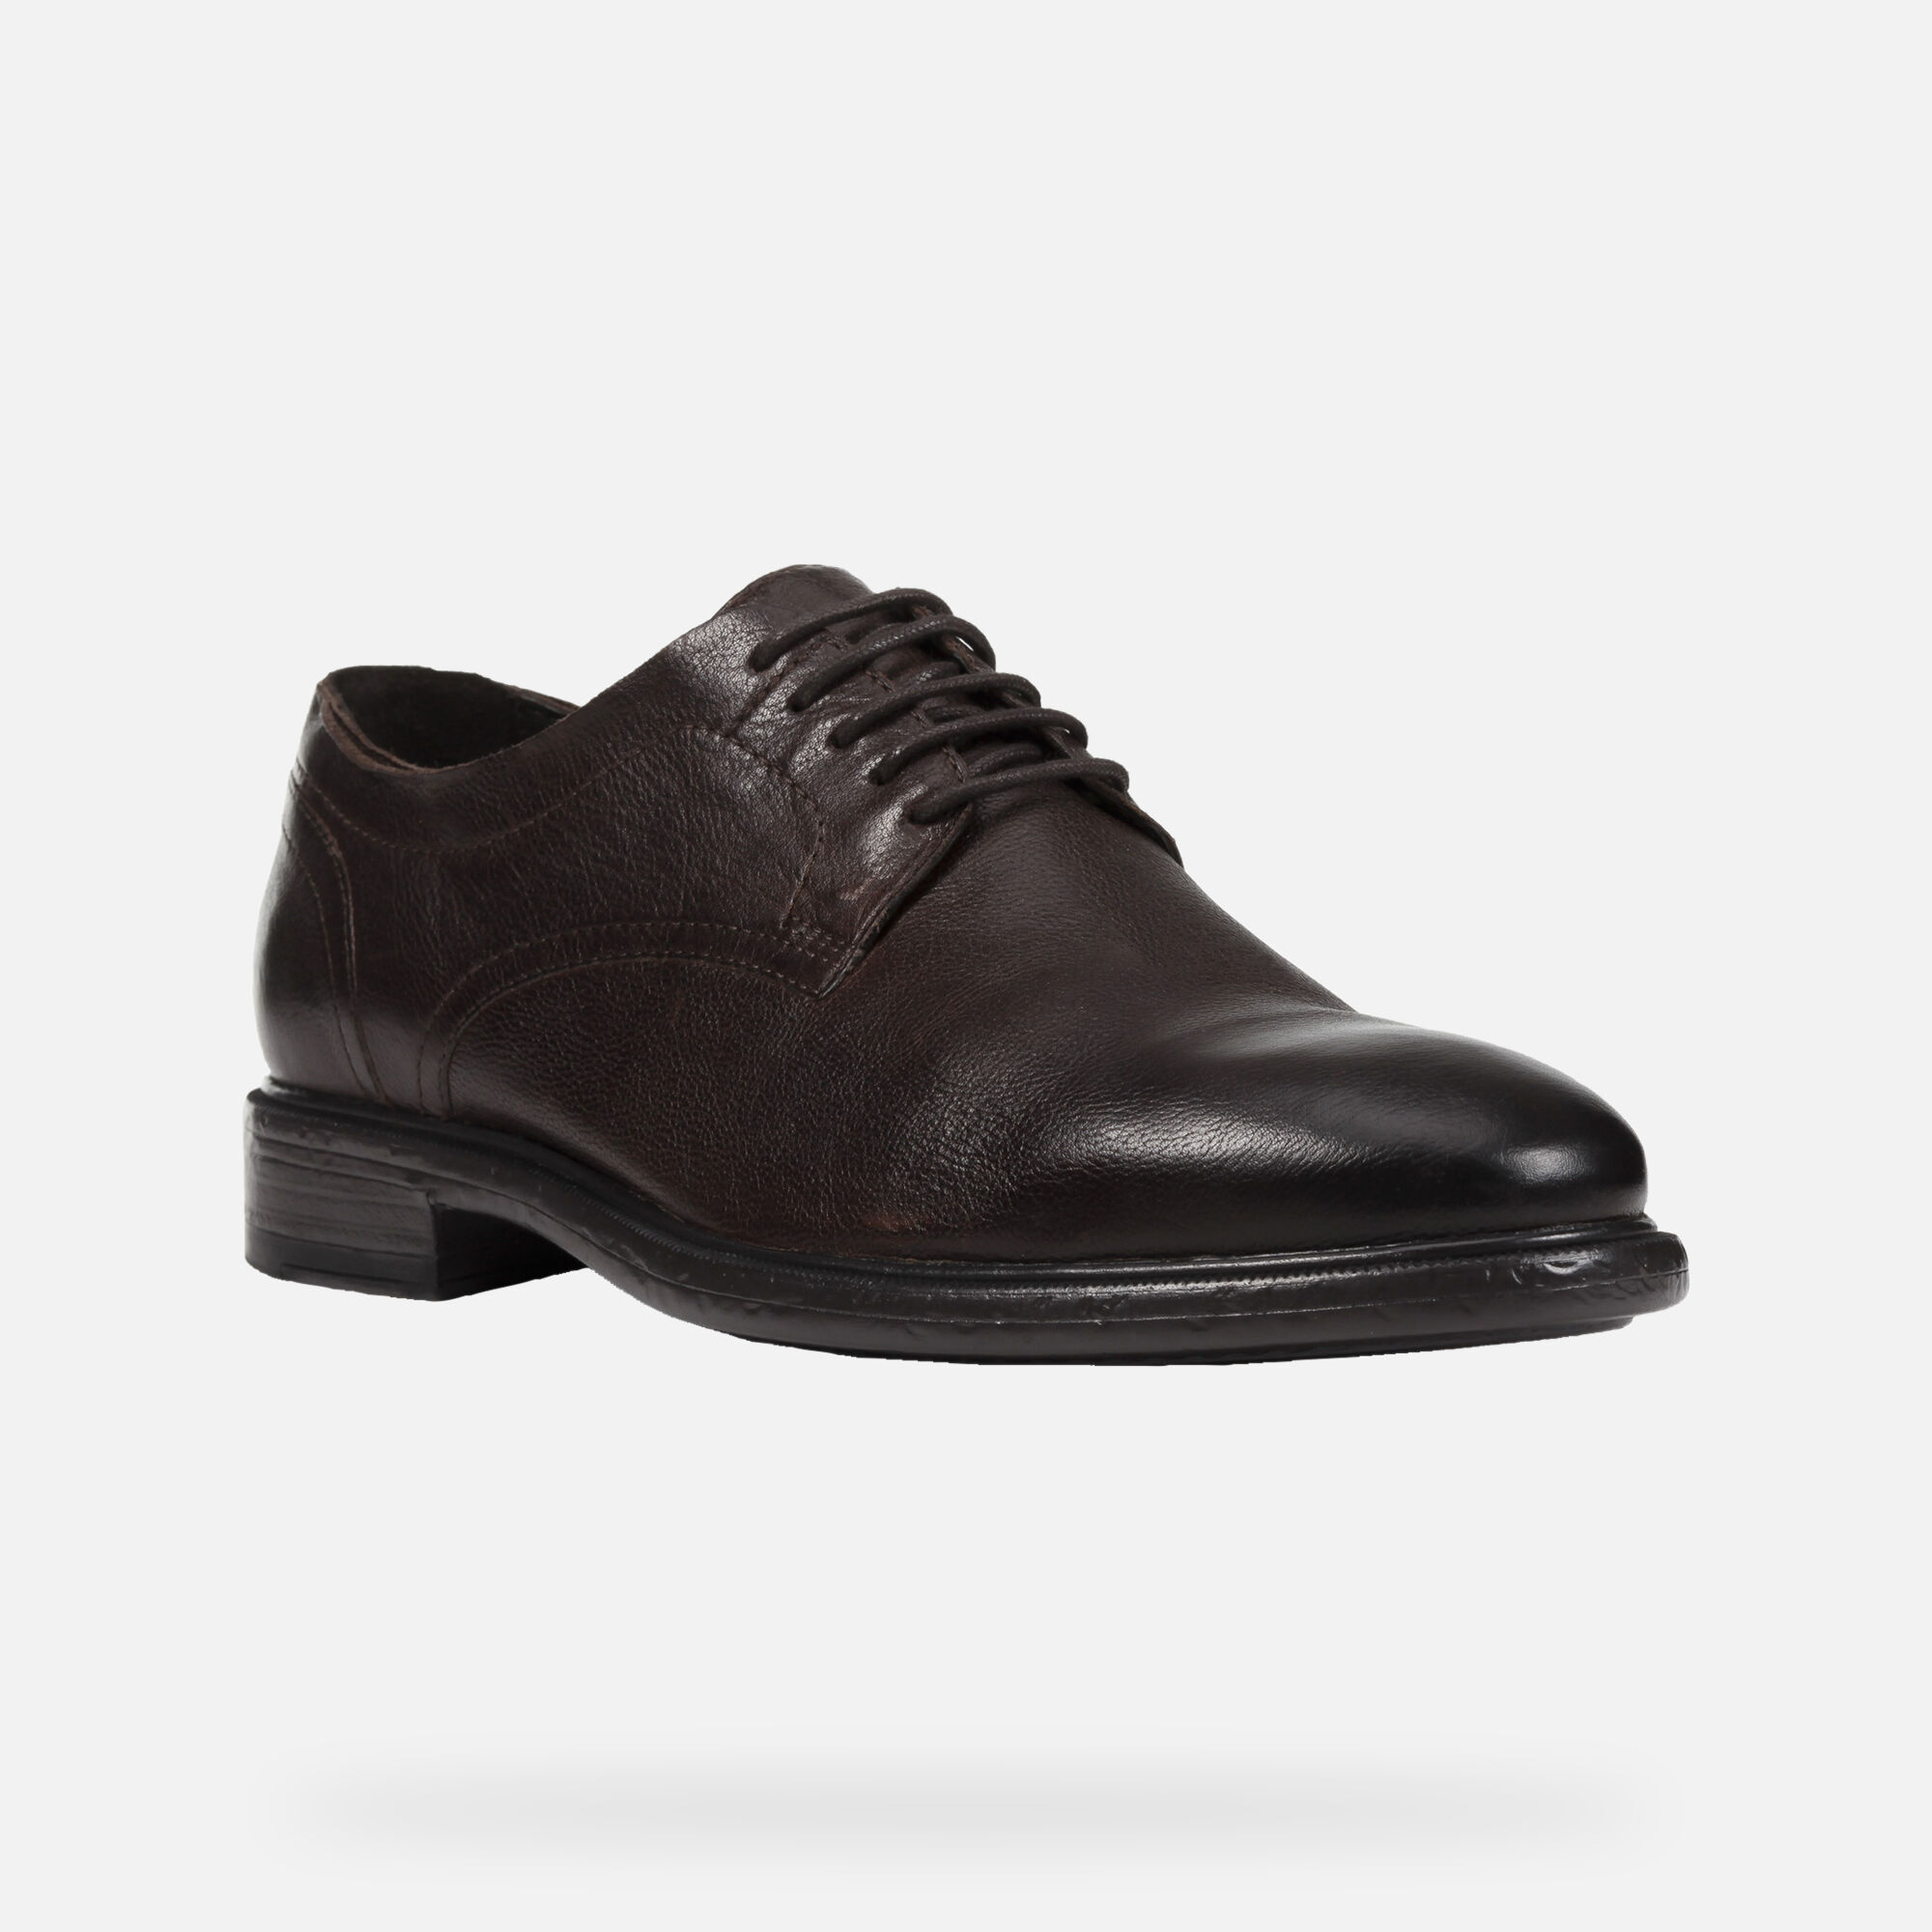 Geox® TERENCE Man: Coffee Shoes | FW21 